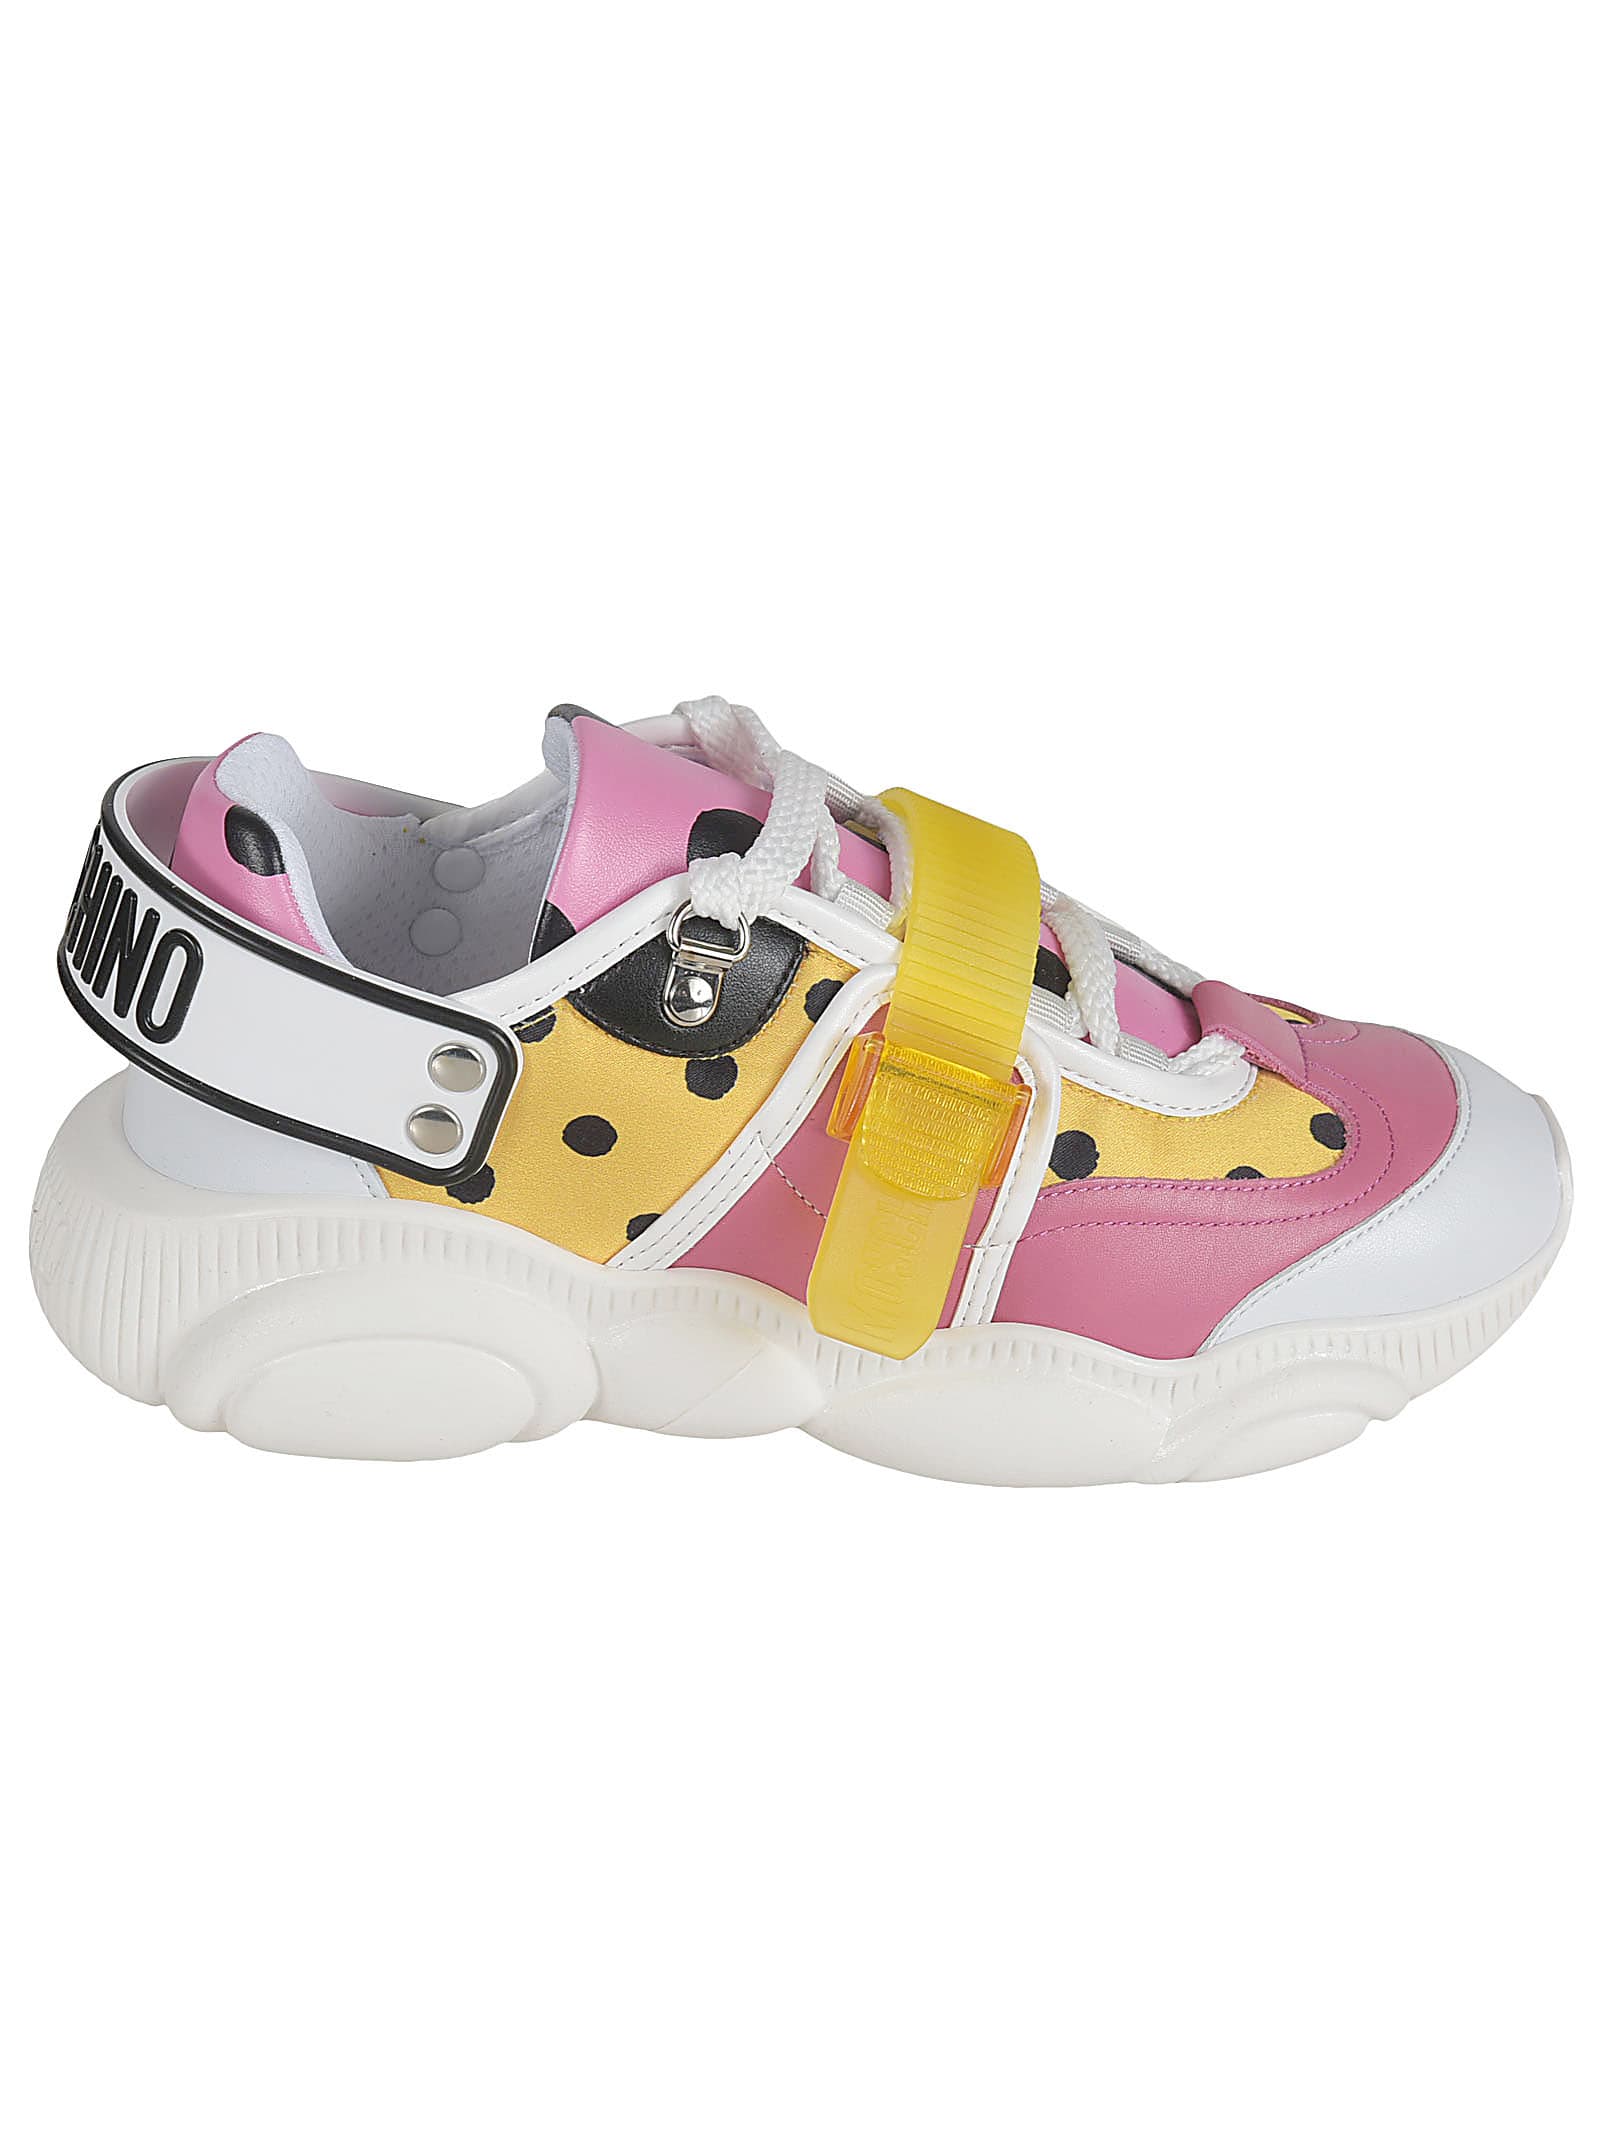 Moschino Polka Dot Strappy Sneakers